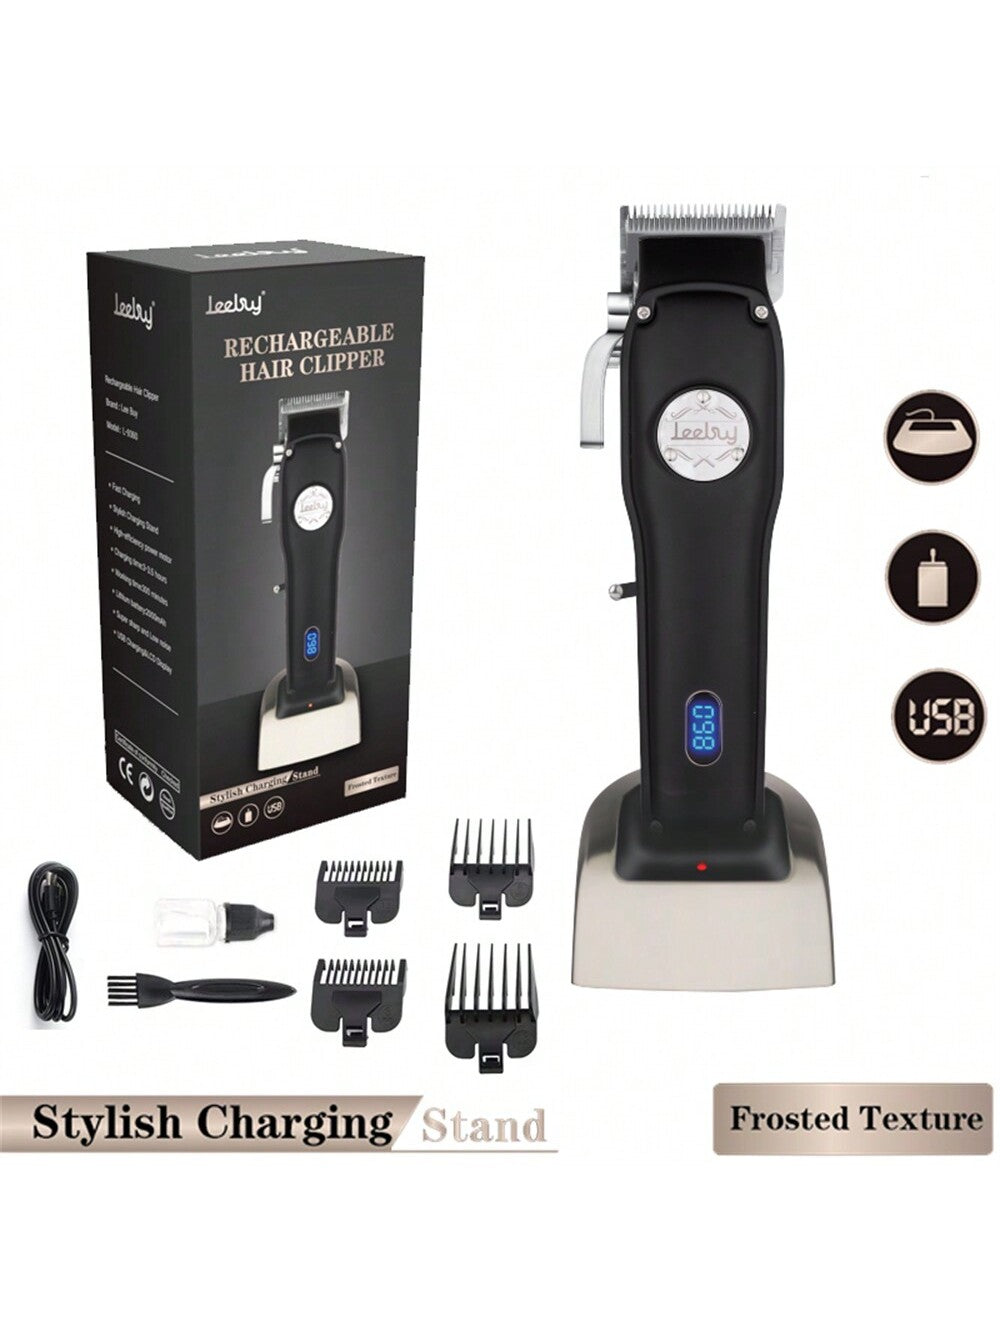 [Luxury Pack] Professional Hair Clippers With Stand, Oil Head Trimmers, Usb Powered Electric Haircut Clippers For Salon Or Home Use 2000mah, Suitable As A Gift-Black-1